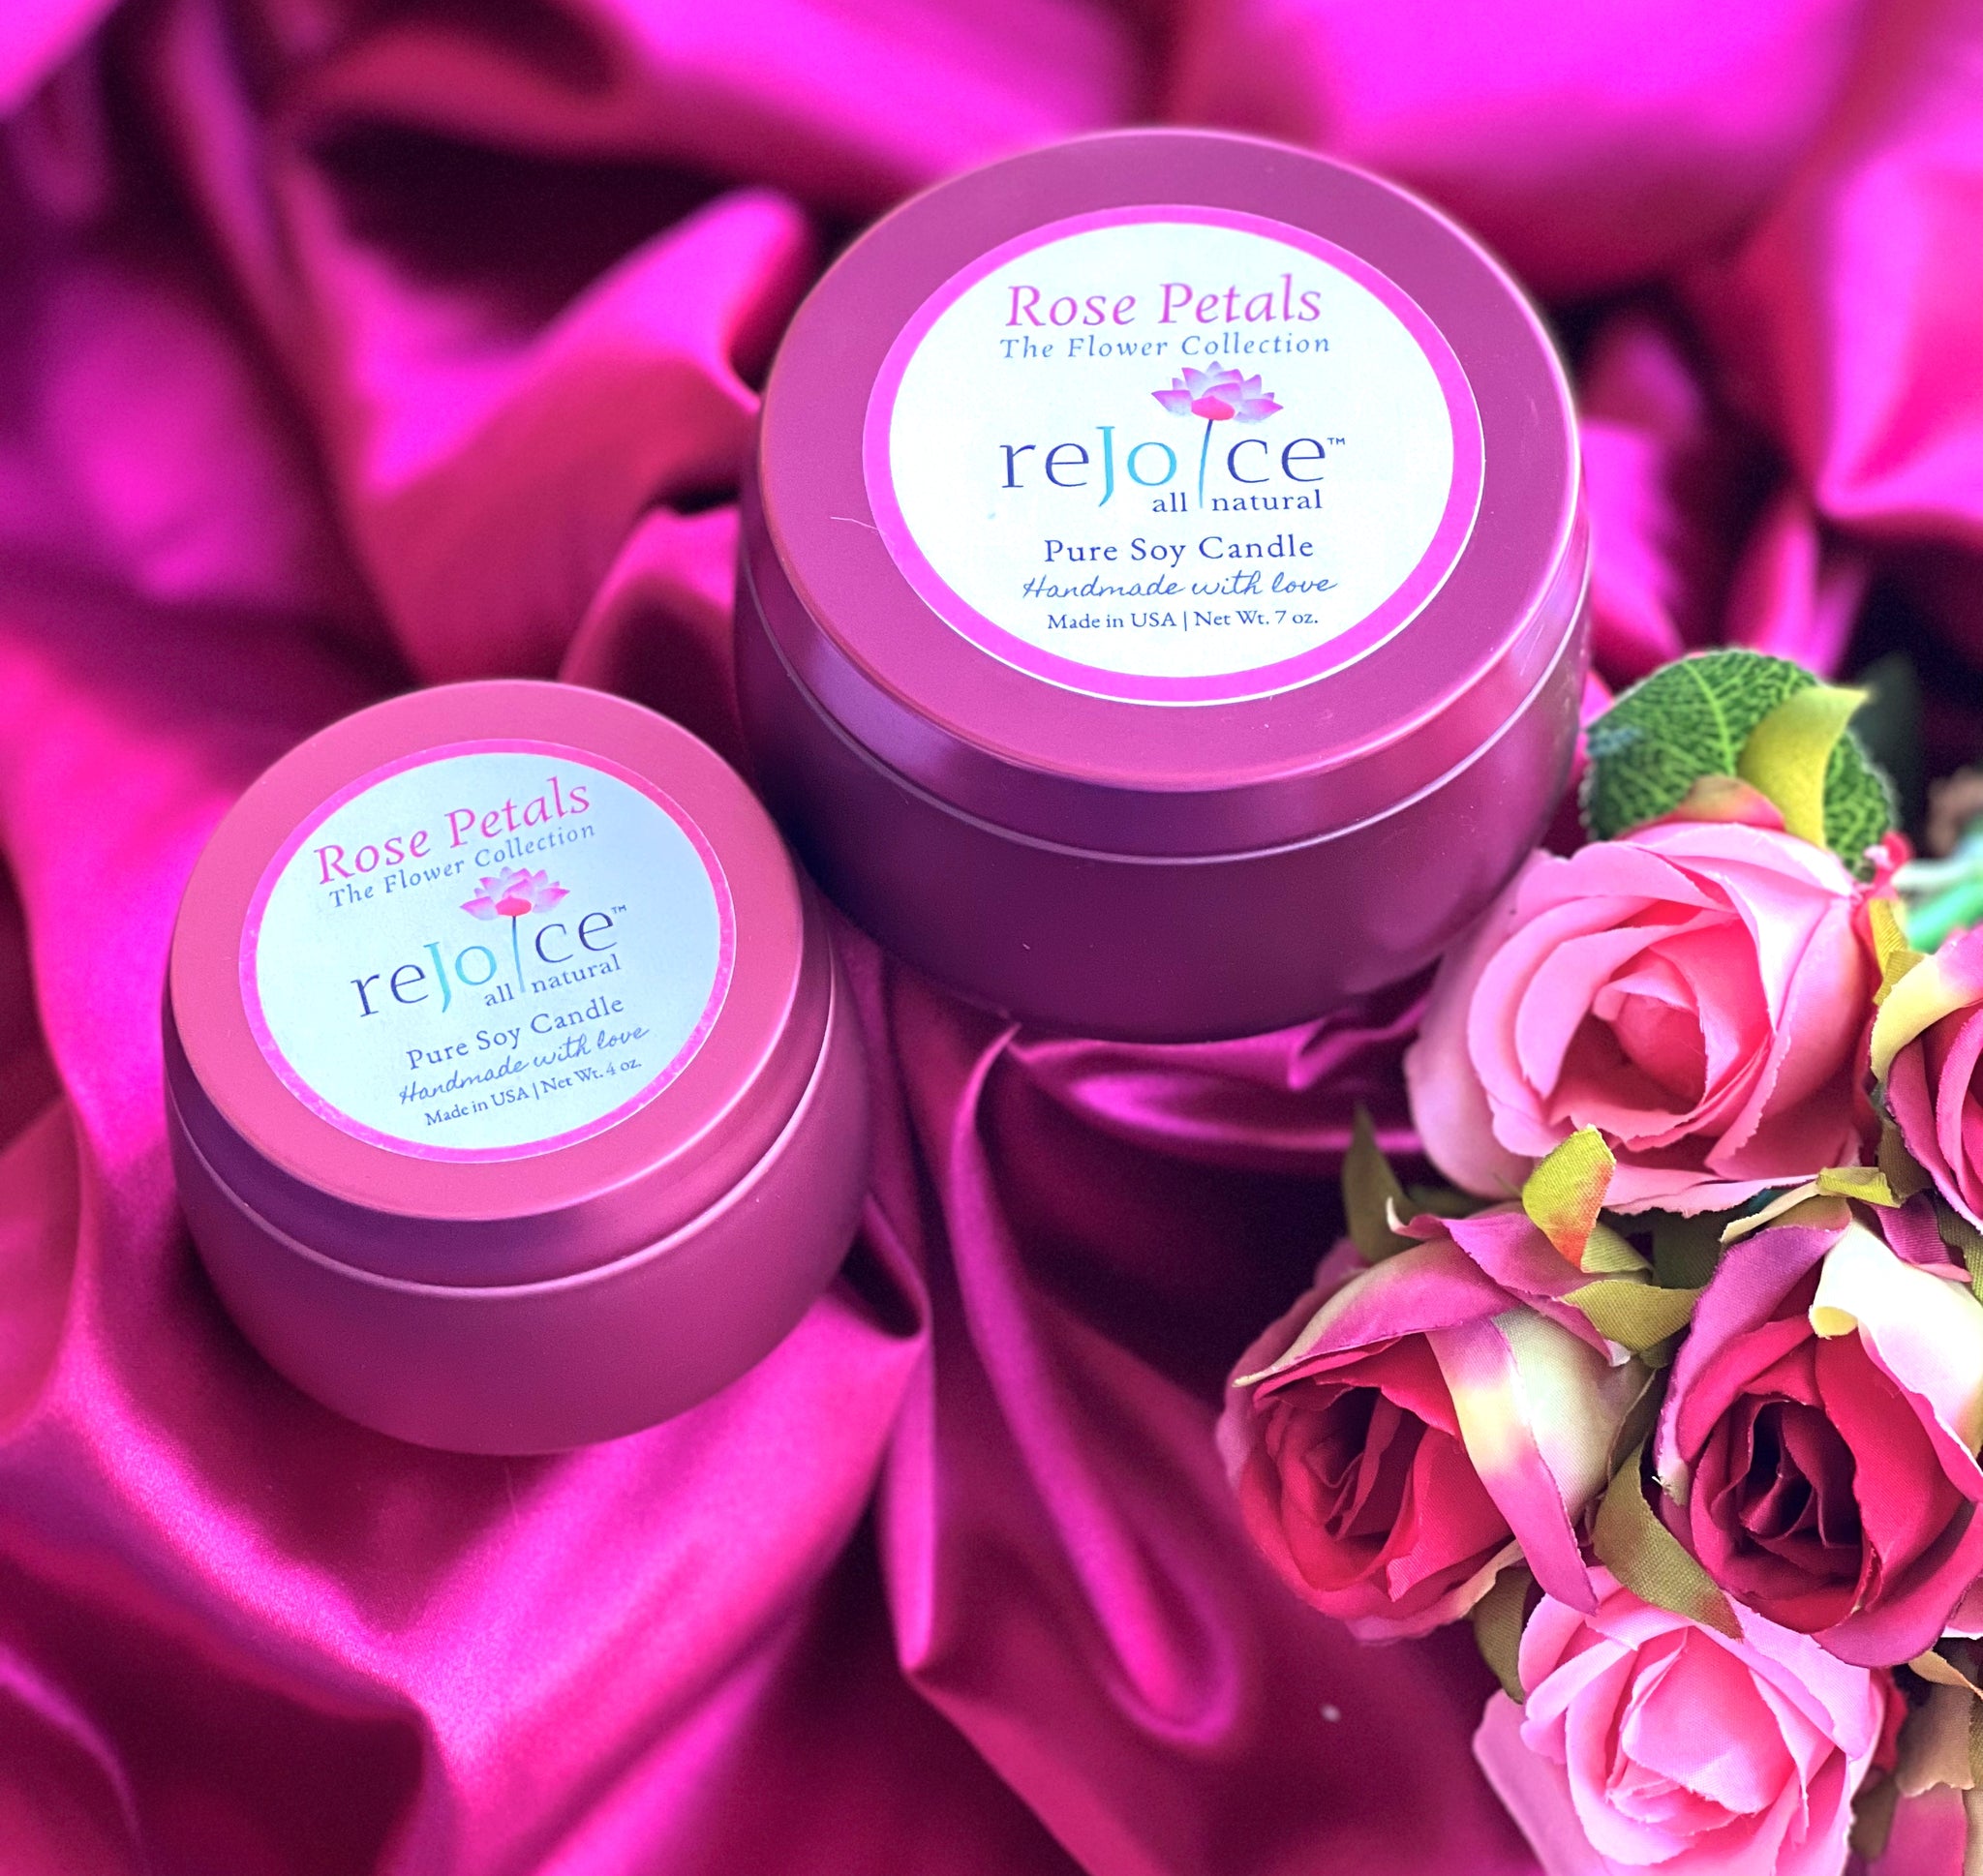 Rose Petal - The Flower Collection – Rejoice All Natural